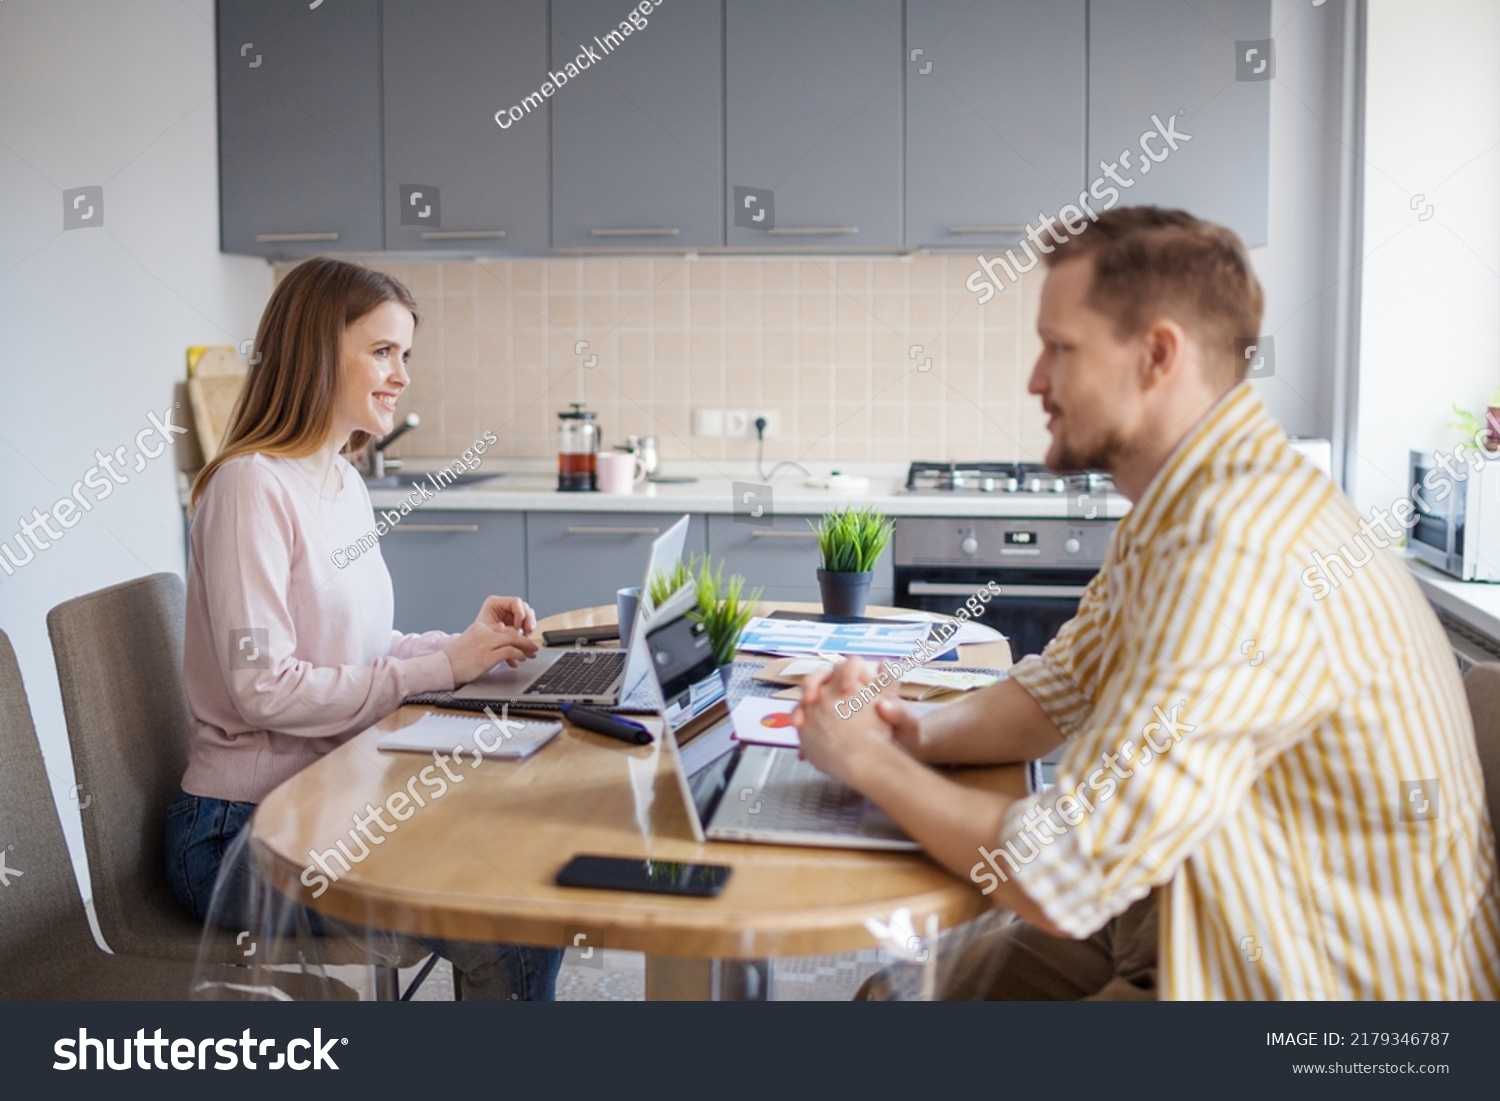 Side view of young couple working from home on laptops sitting together at table. Wife and husband discussing business while working remotely or as freelancers #2179346787